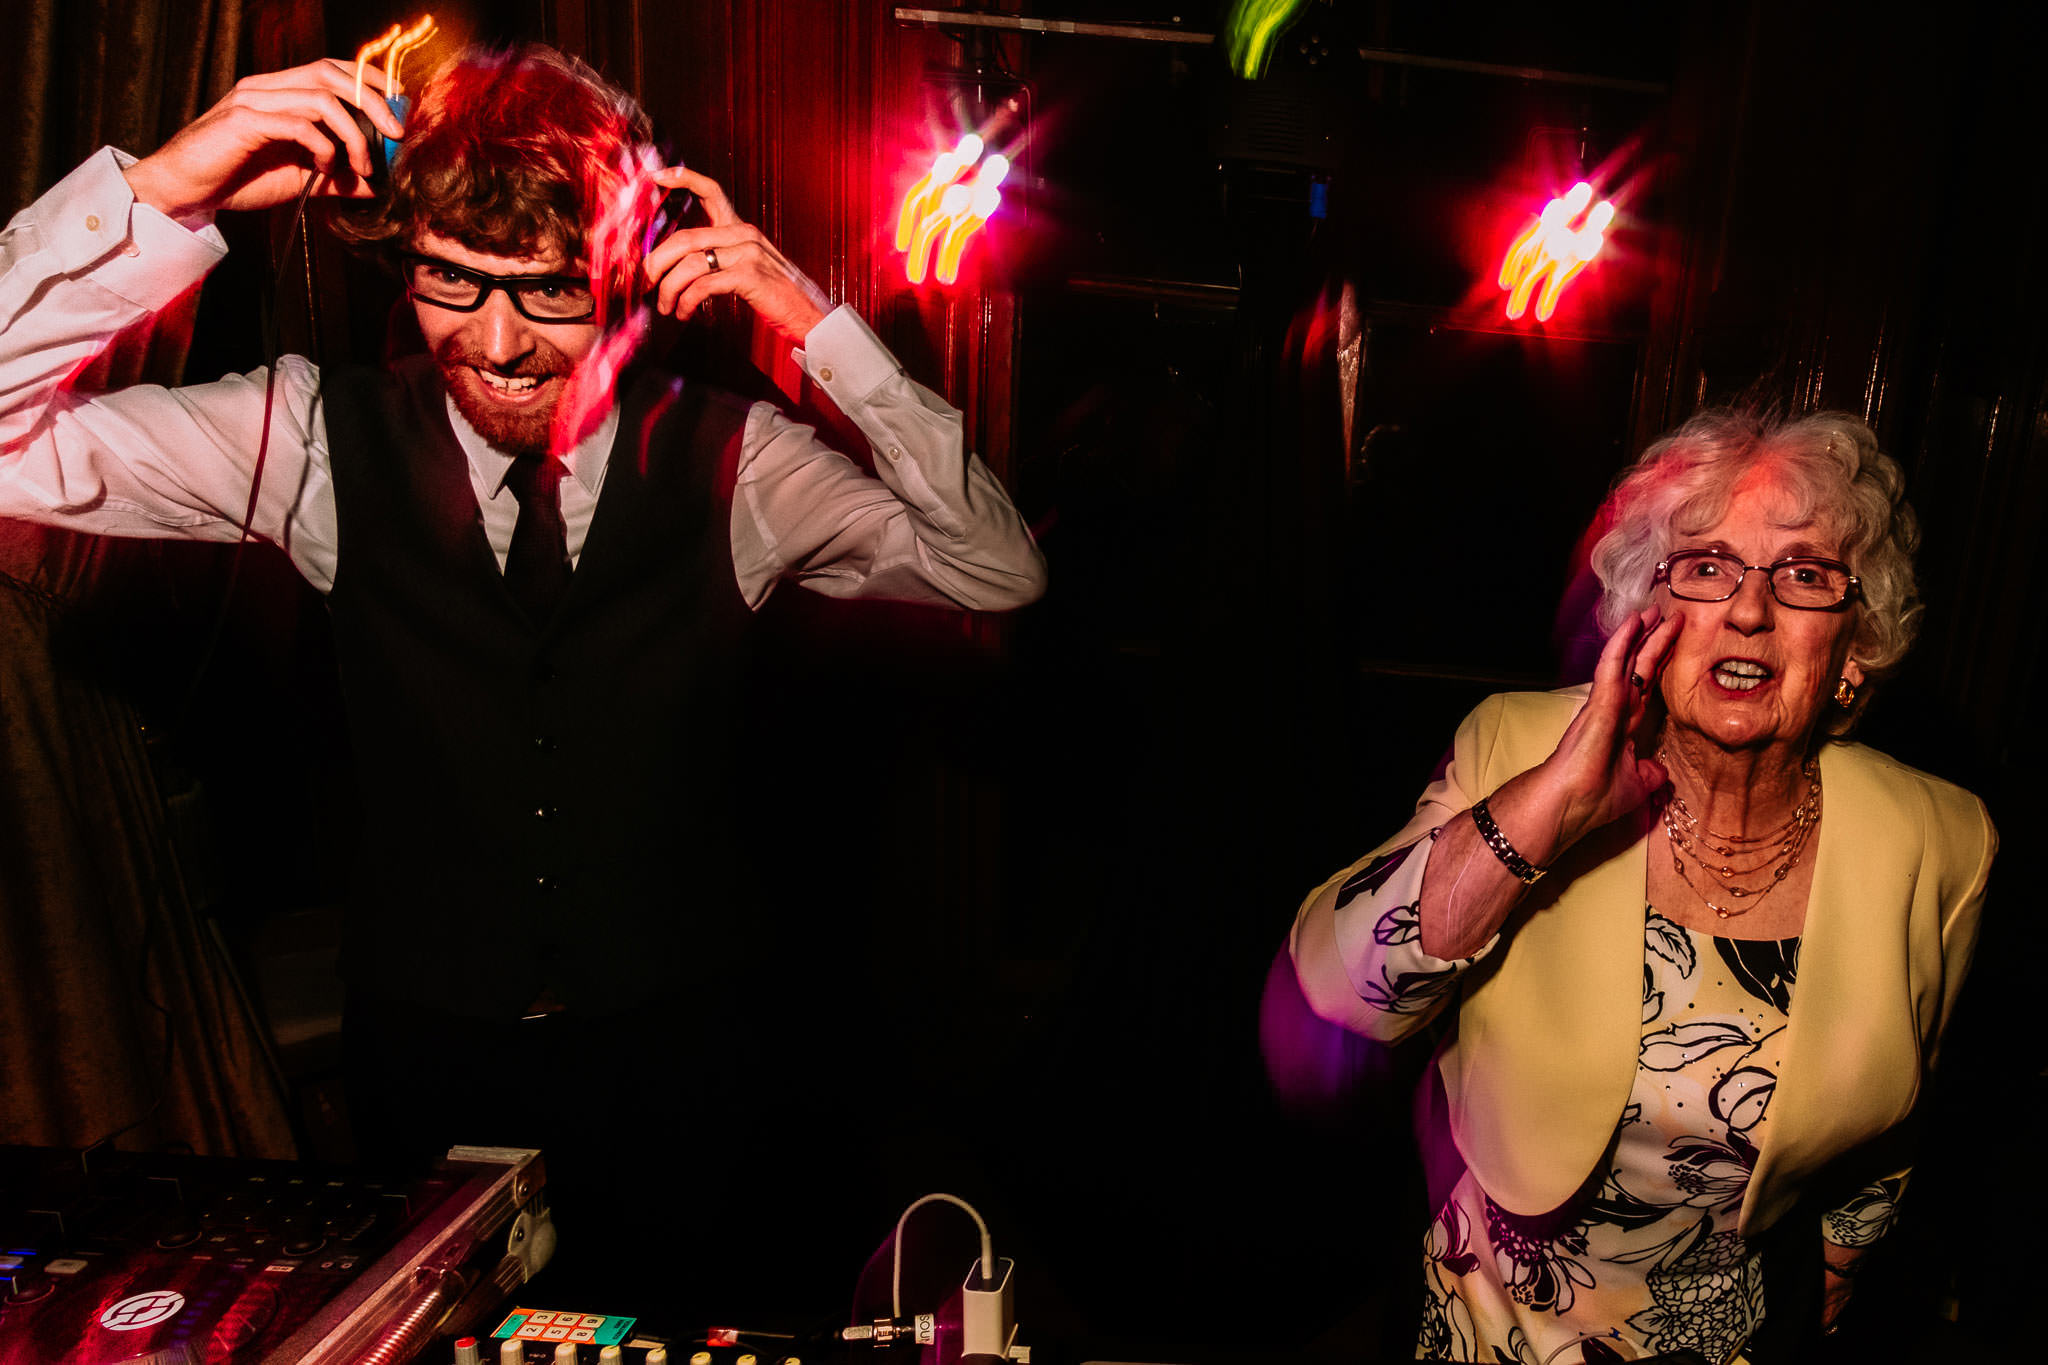 Drunk Grandma partying at Haigh Hall hotel Wigan with DJ decks. Disounts avaliable.